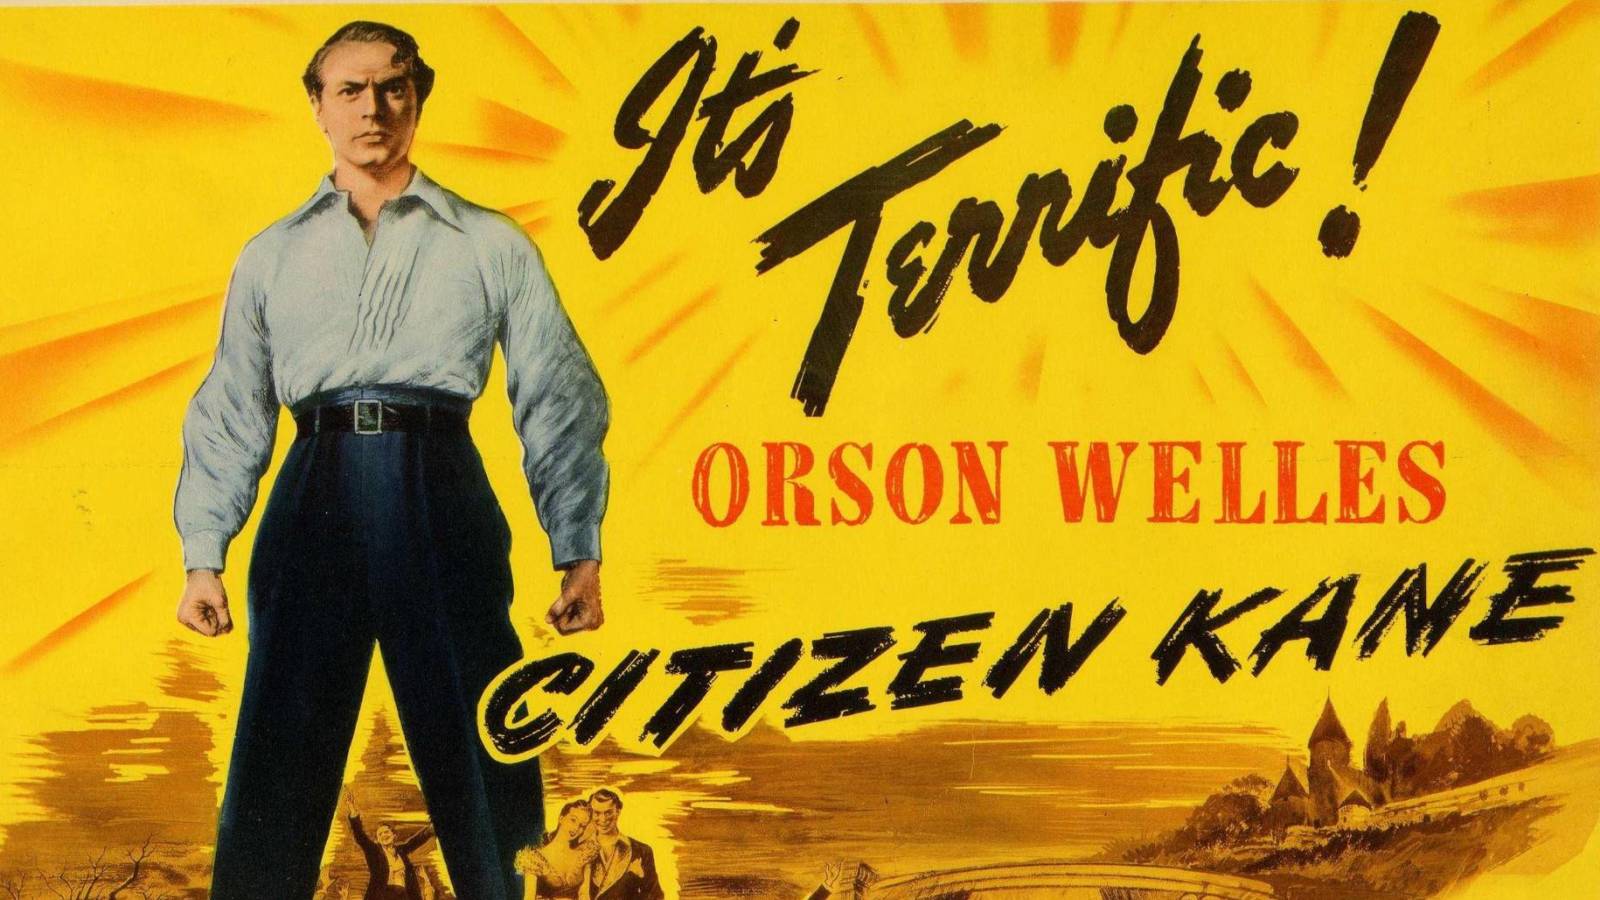 42-facts-about-the-movie-citizen-kane